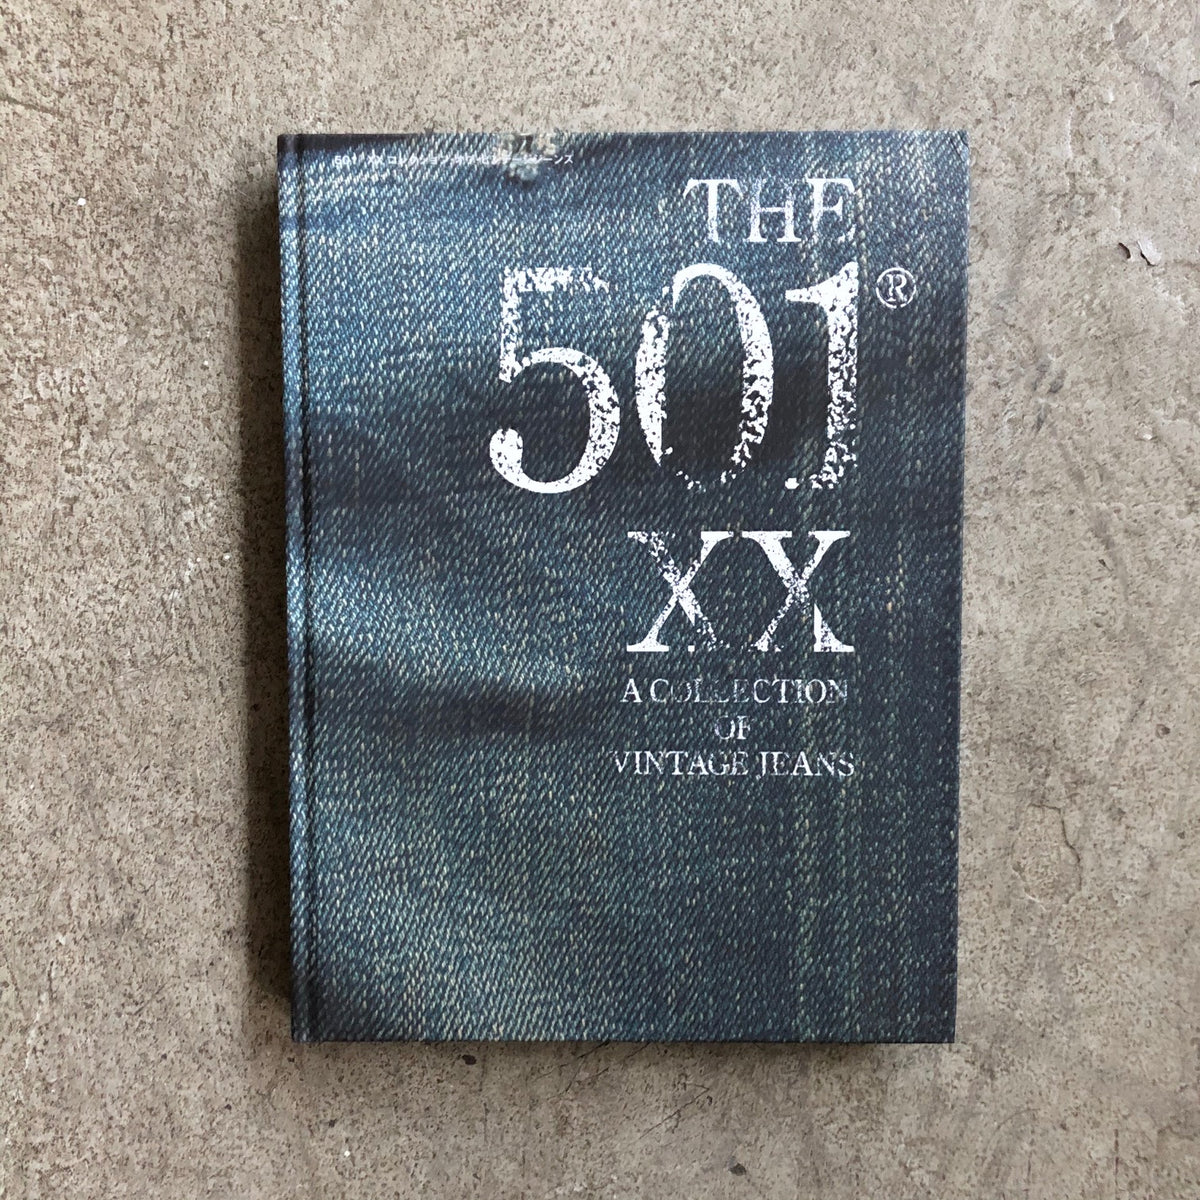 the 501 xx – a collection of vintage jeans | made in japan